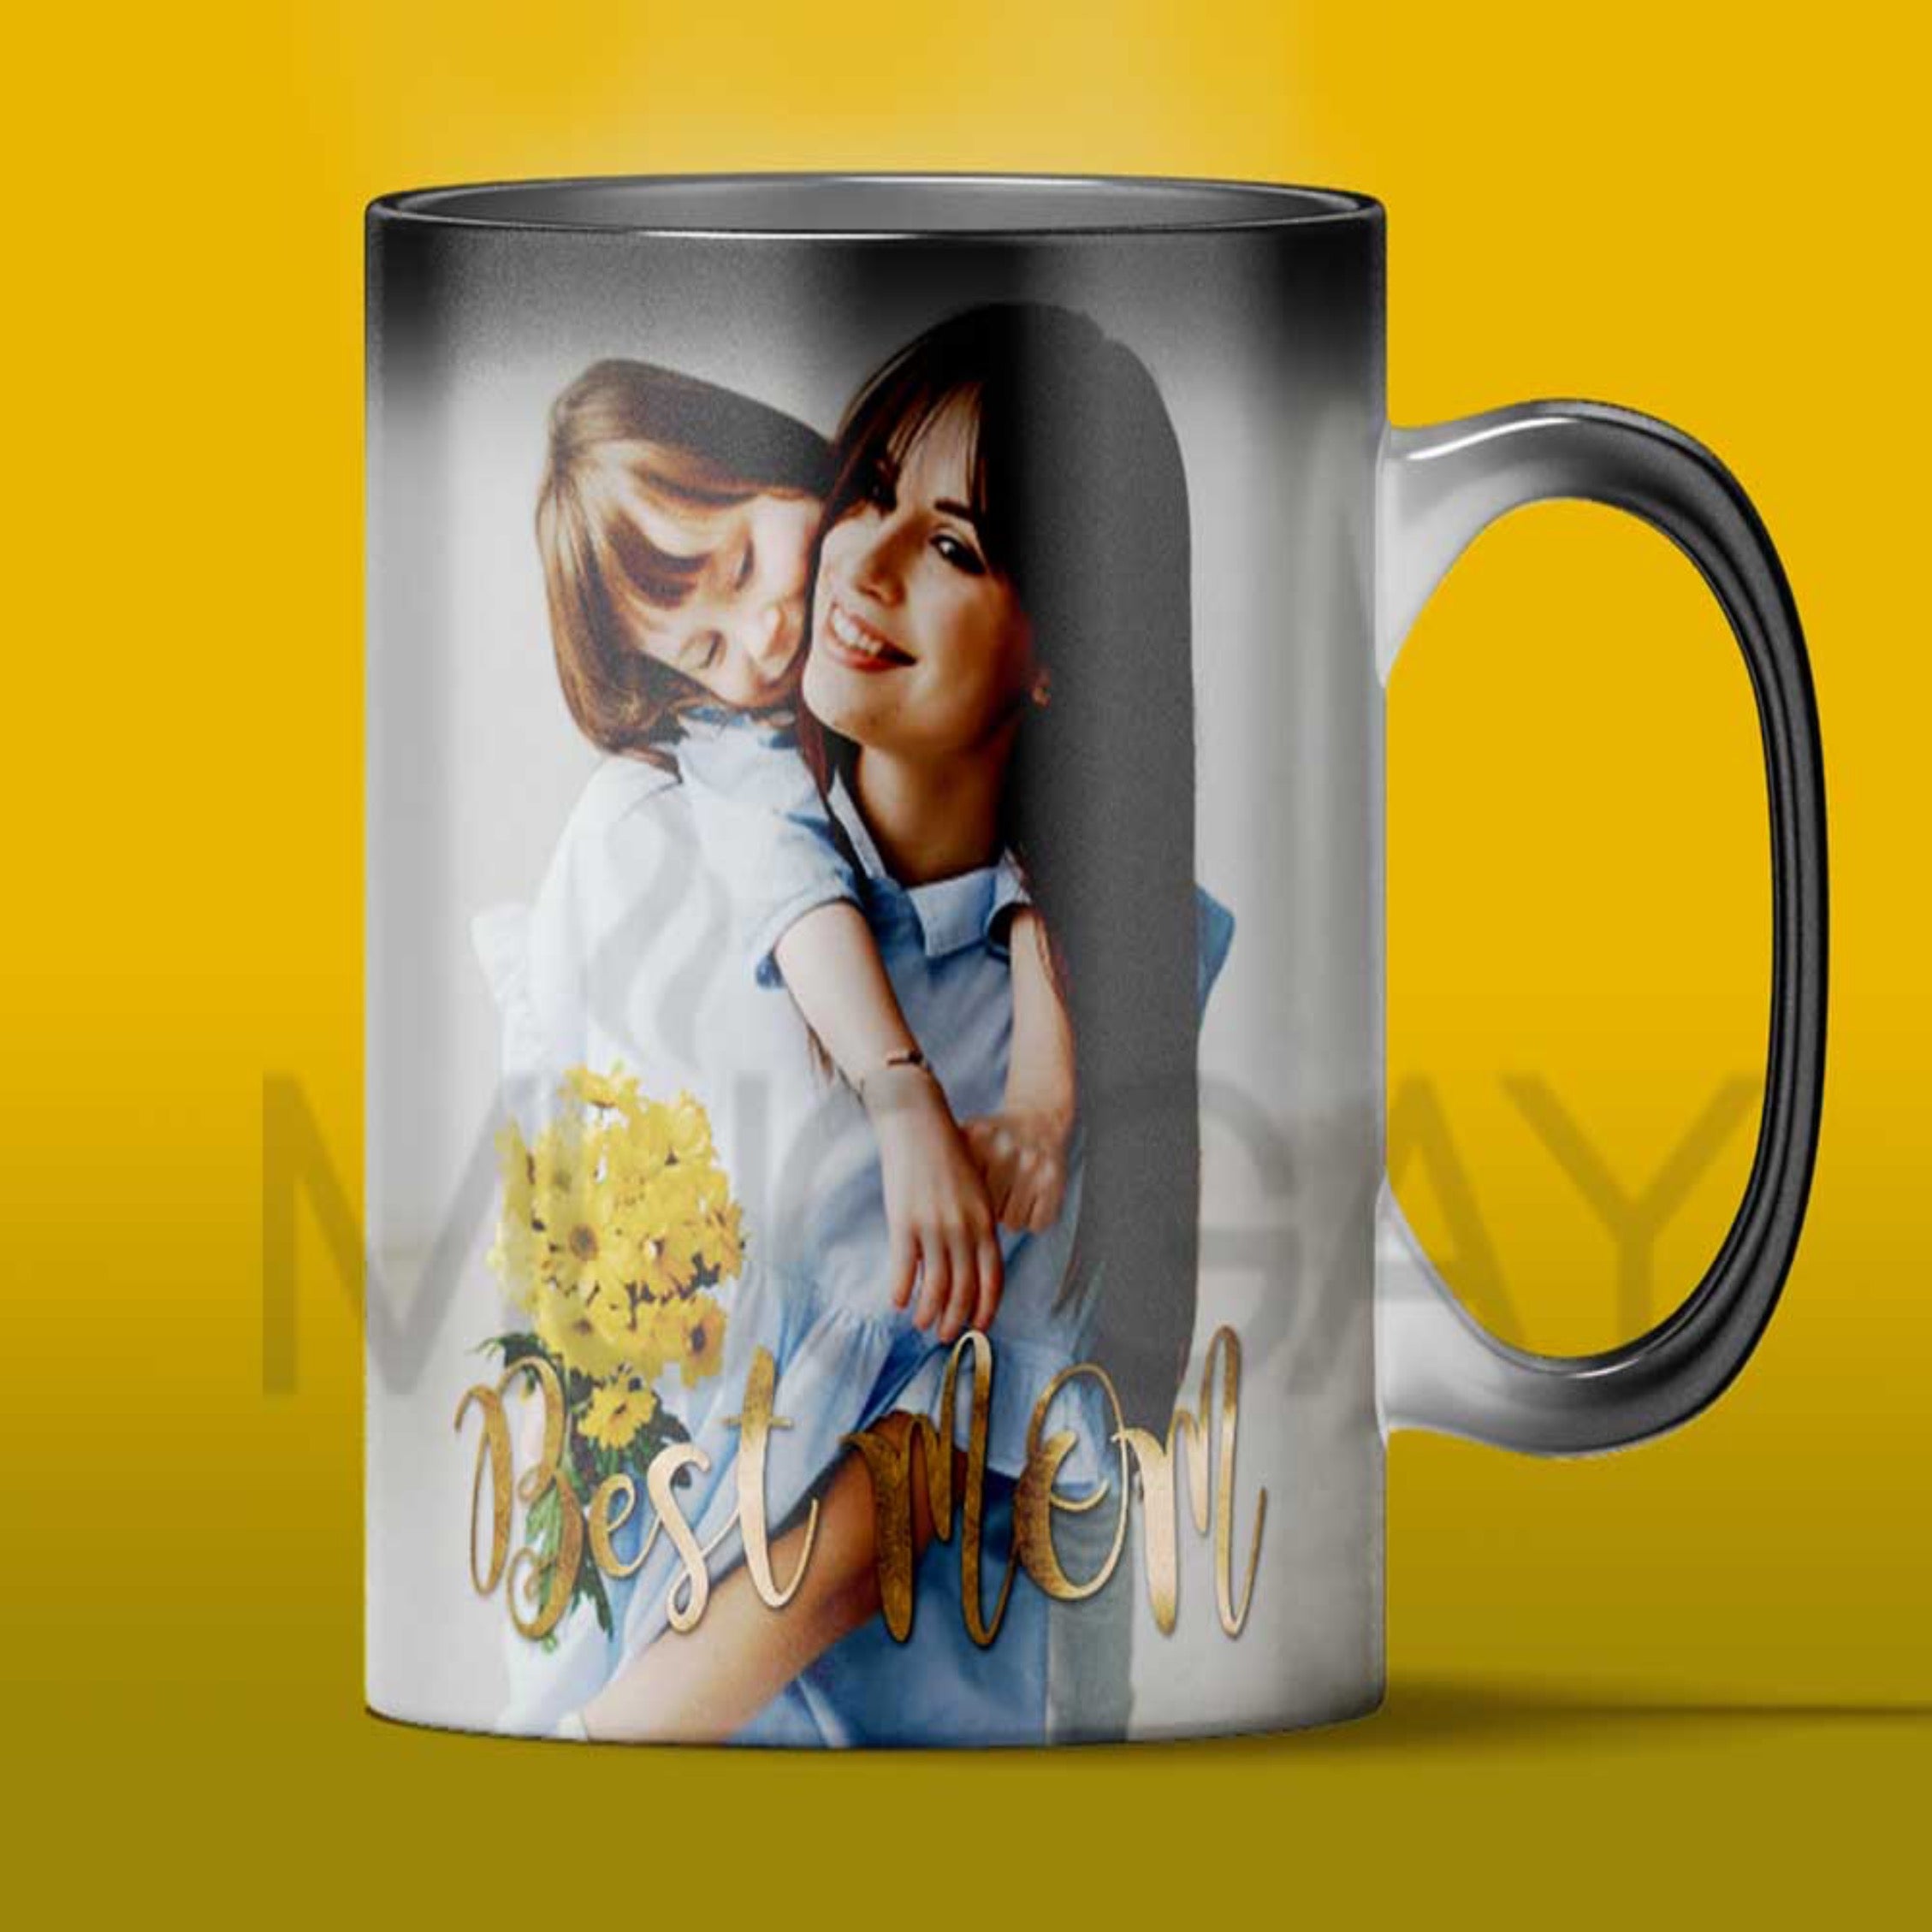 Best Mom - Magic mug - Add your picture